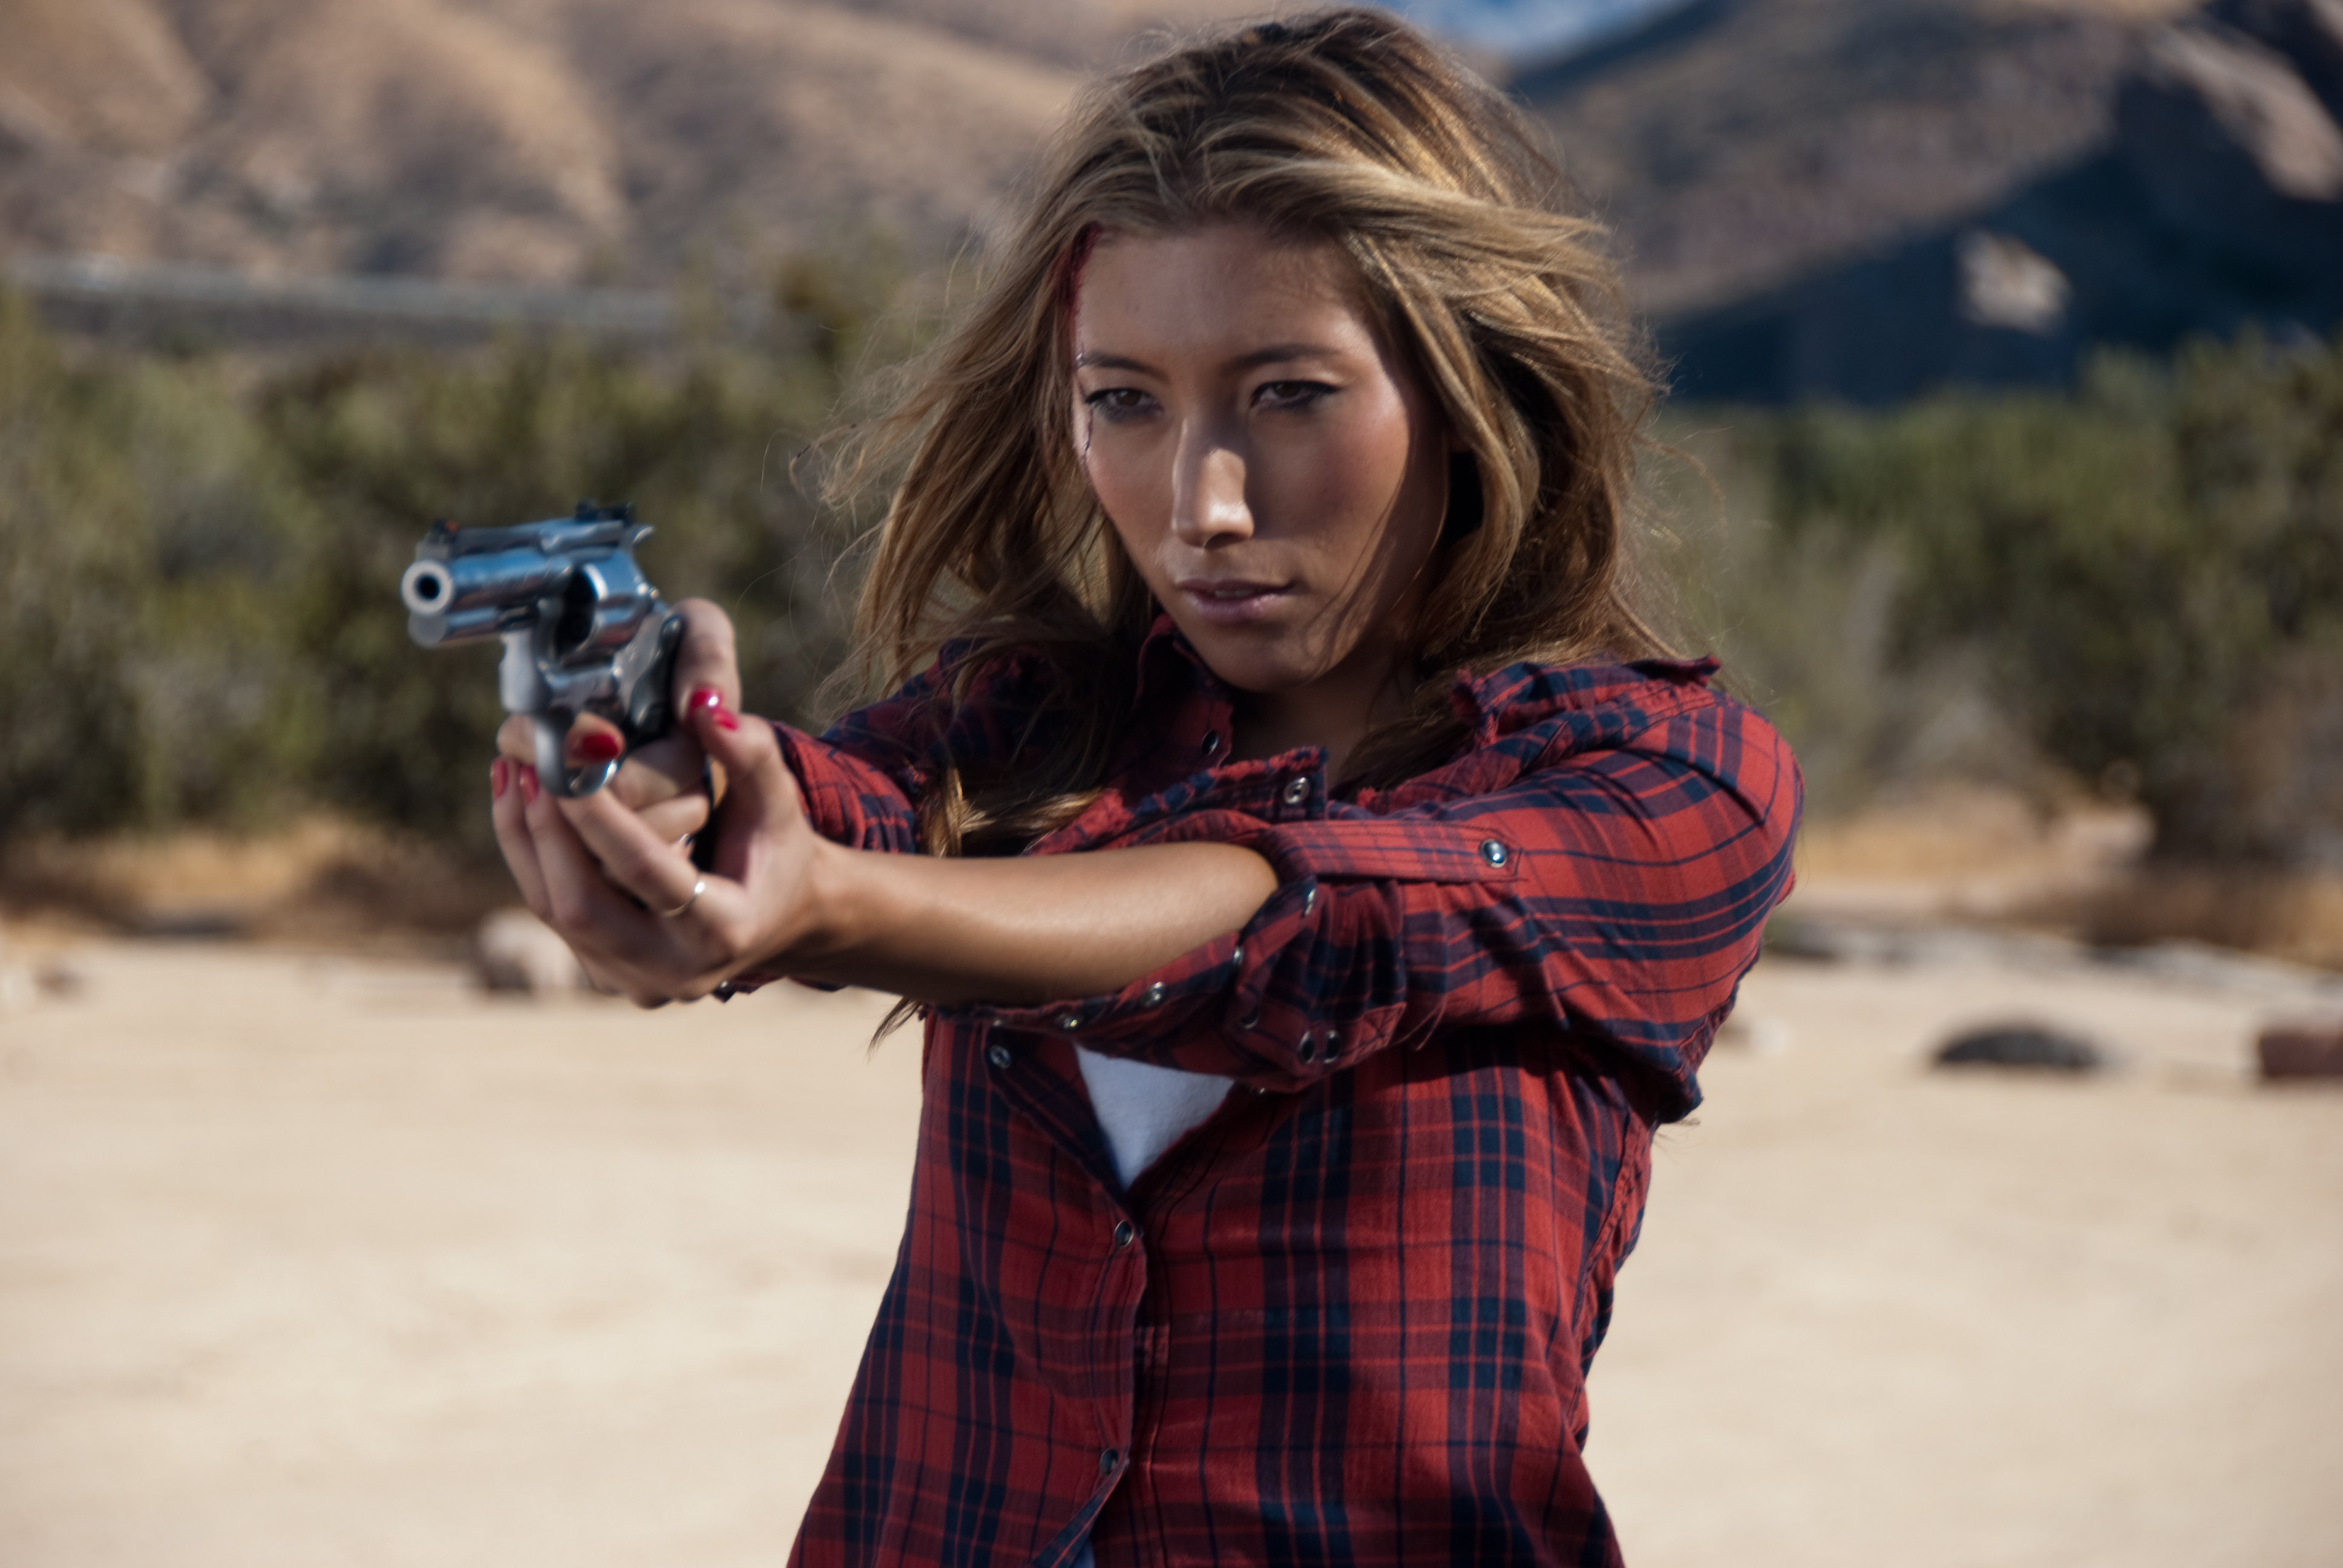 Dichen Lachman in Sunday Punch (2010)